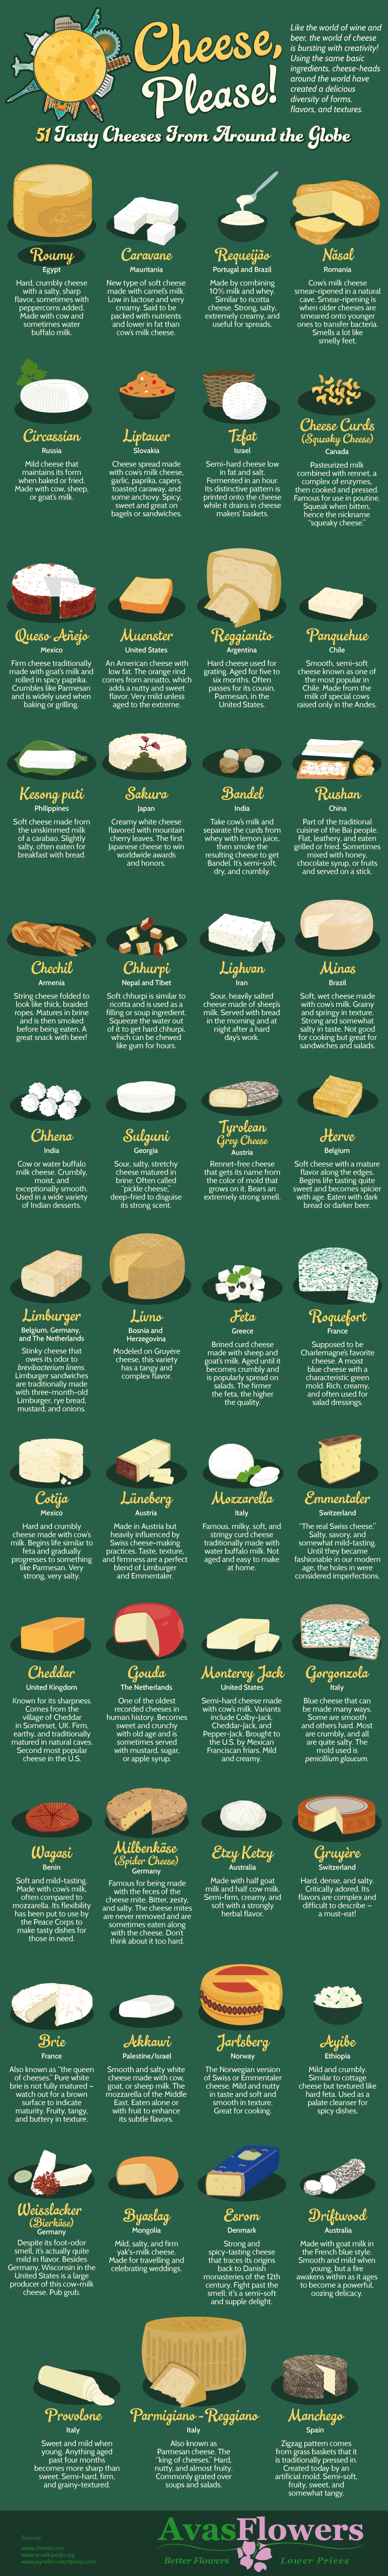 Cheese Please! 51 Tasty Cheeses From Around the Globe - Avasflowers.net - Infographic